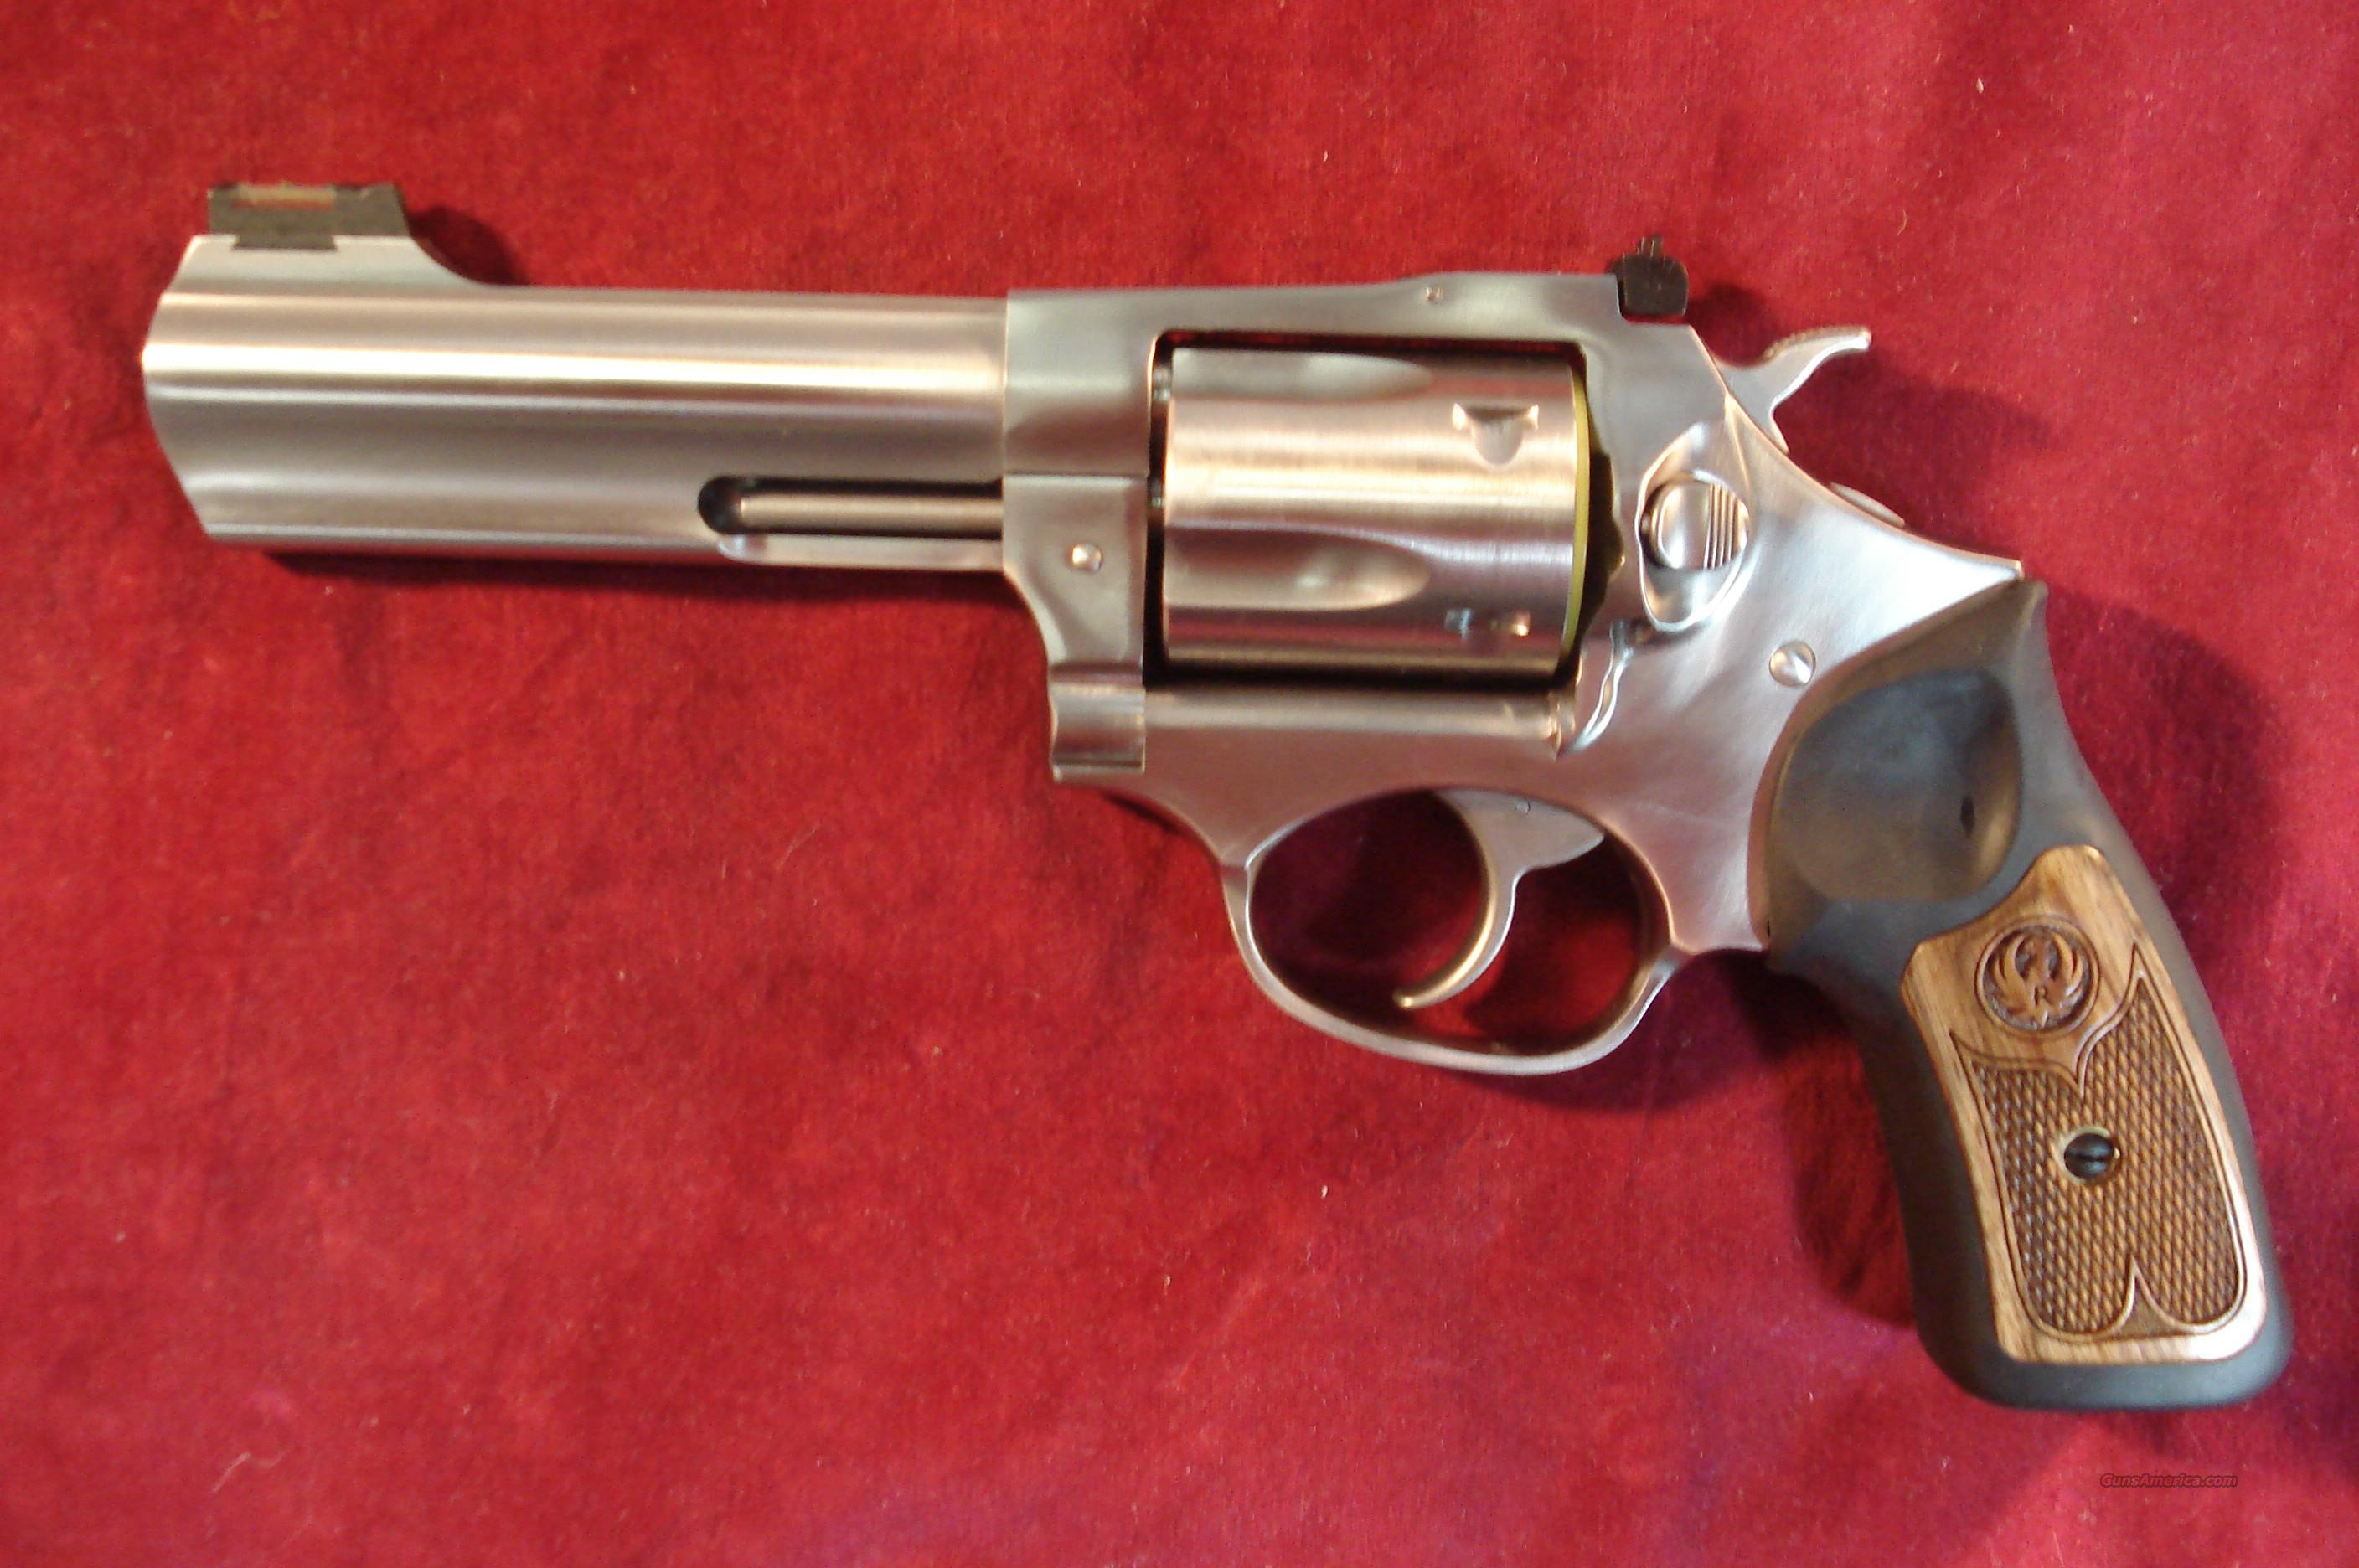 Ruger Sp101 Stainless 5 Shot 357 Ma For Sale At 933532612 7906